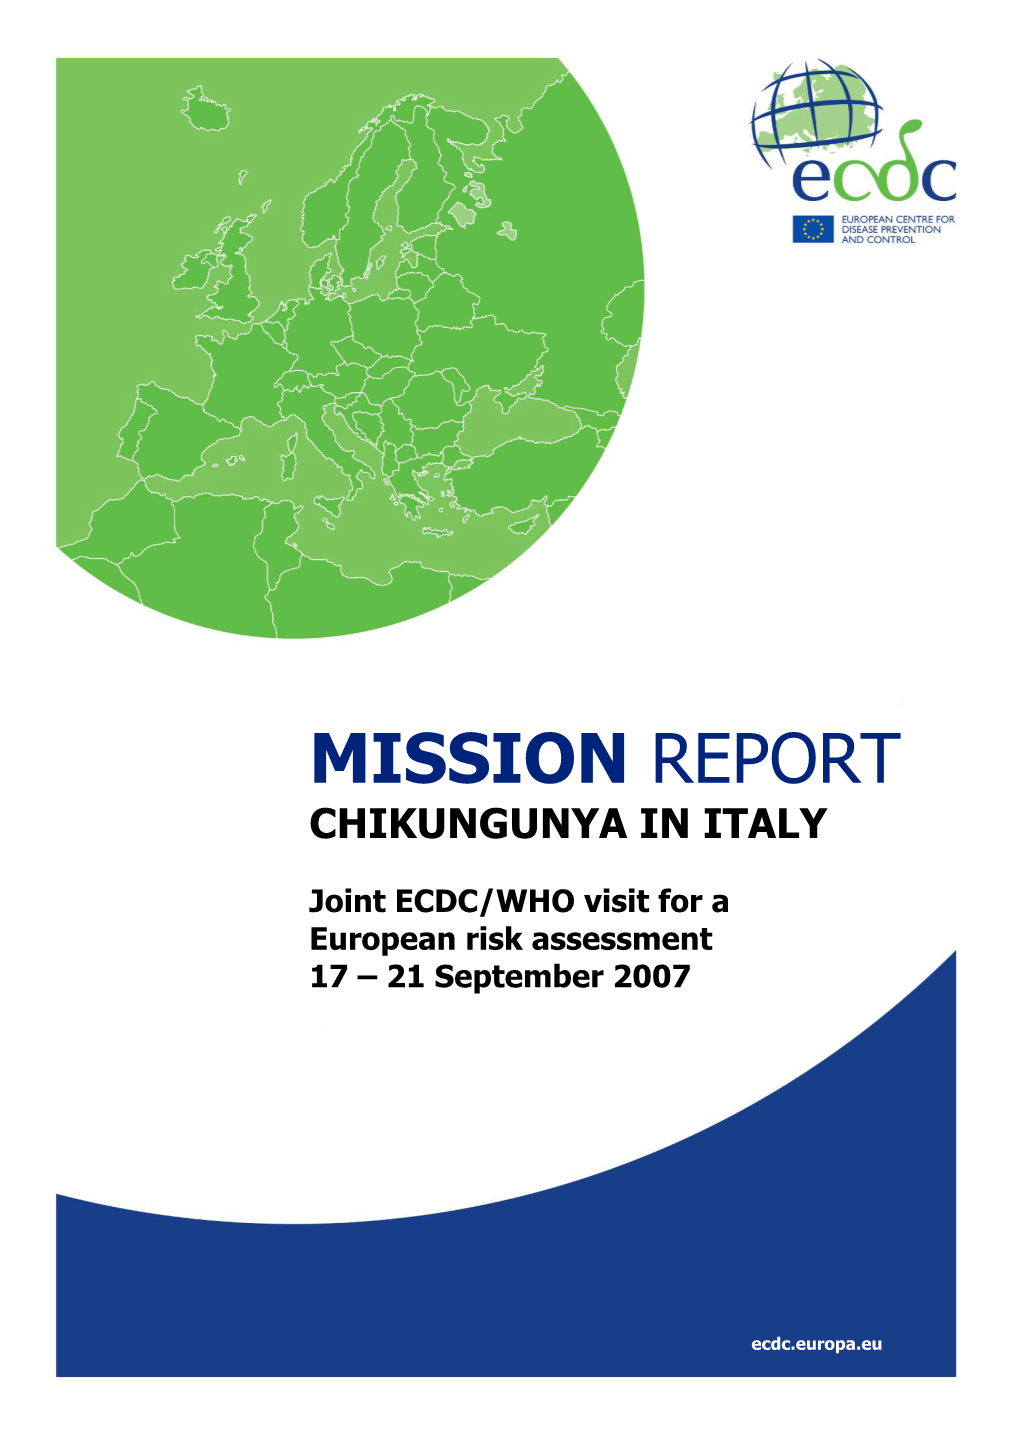 Mission Report Chikungunya in Italy